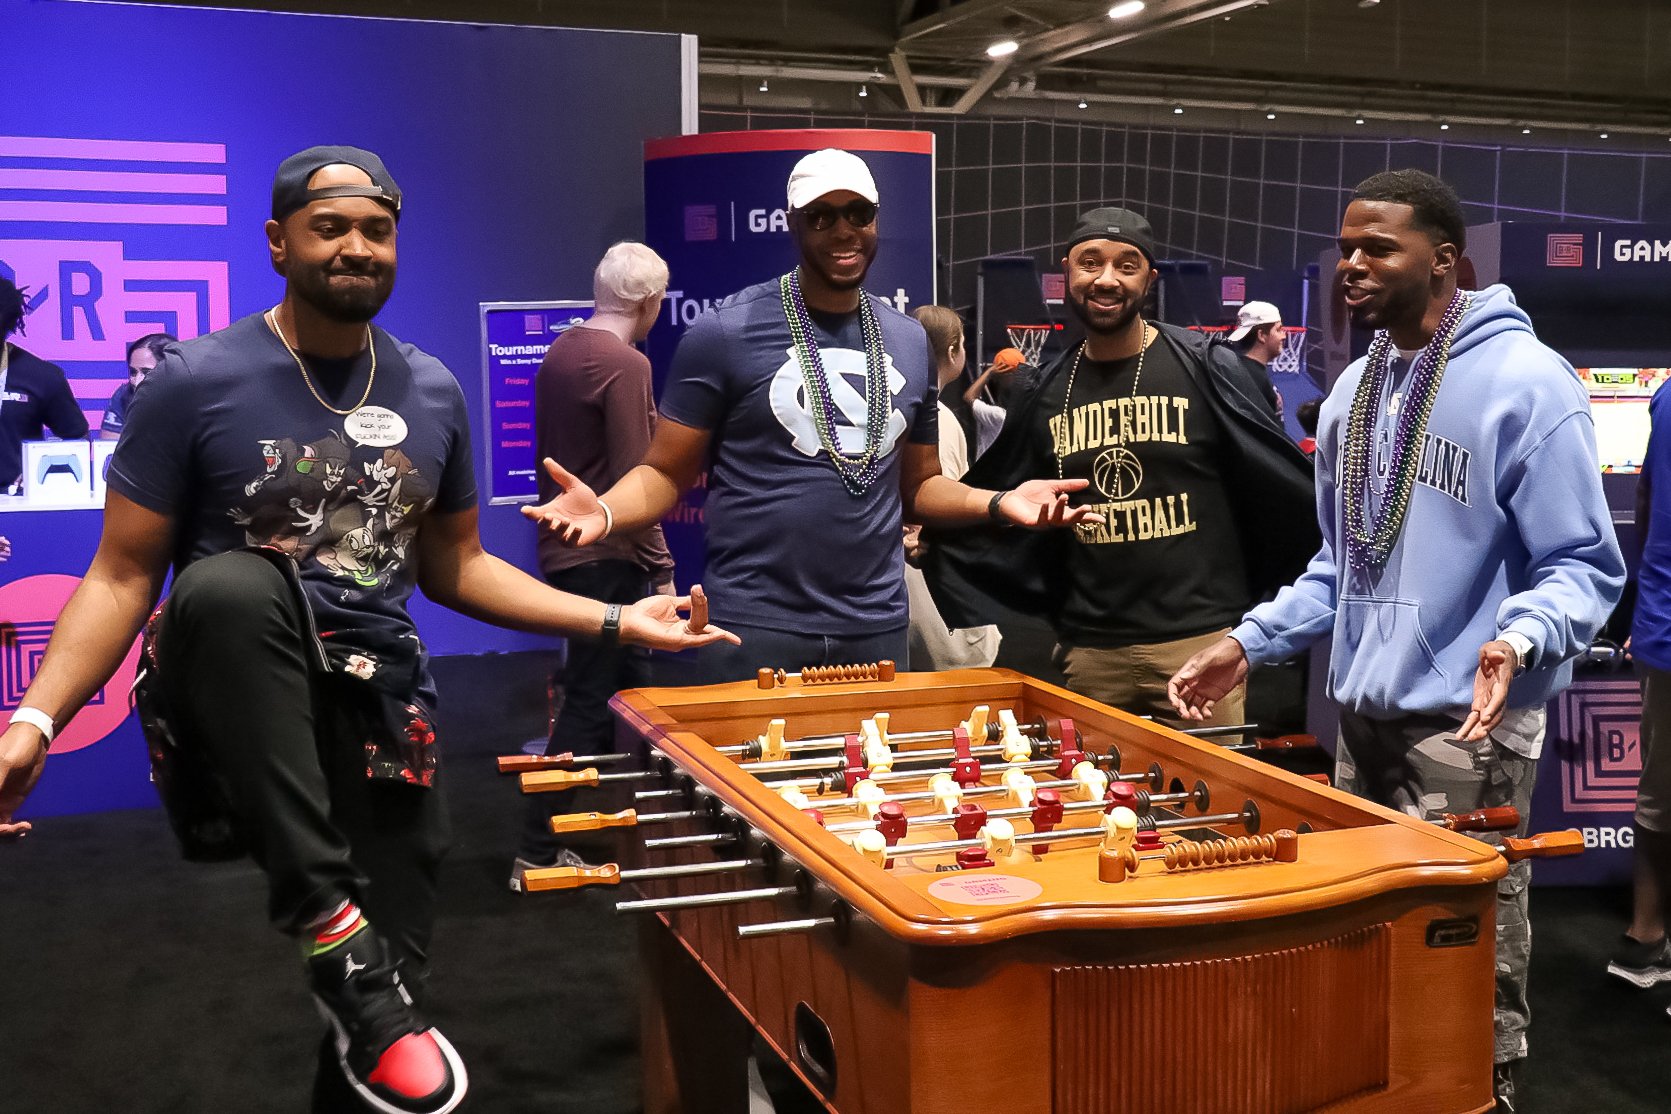 4 black men playing foosball pose for the camera. two wear North Carolina merch and one wears a Vanderbilt basketball shirt. 